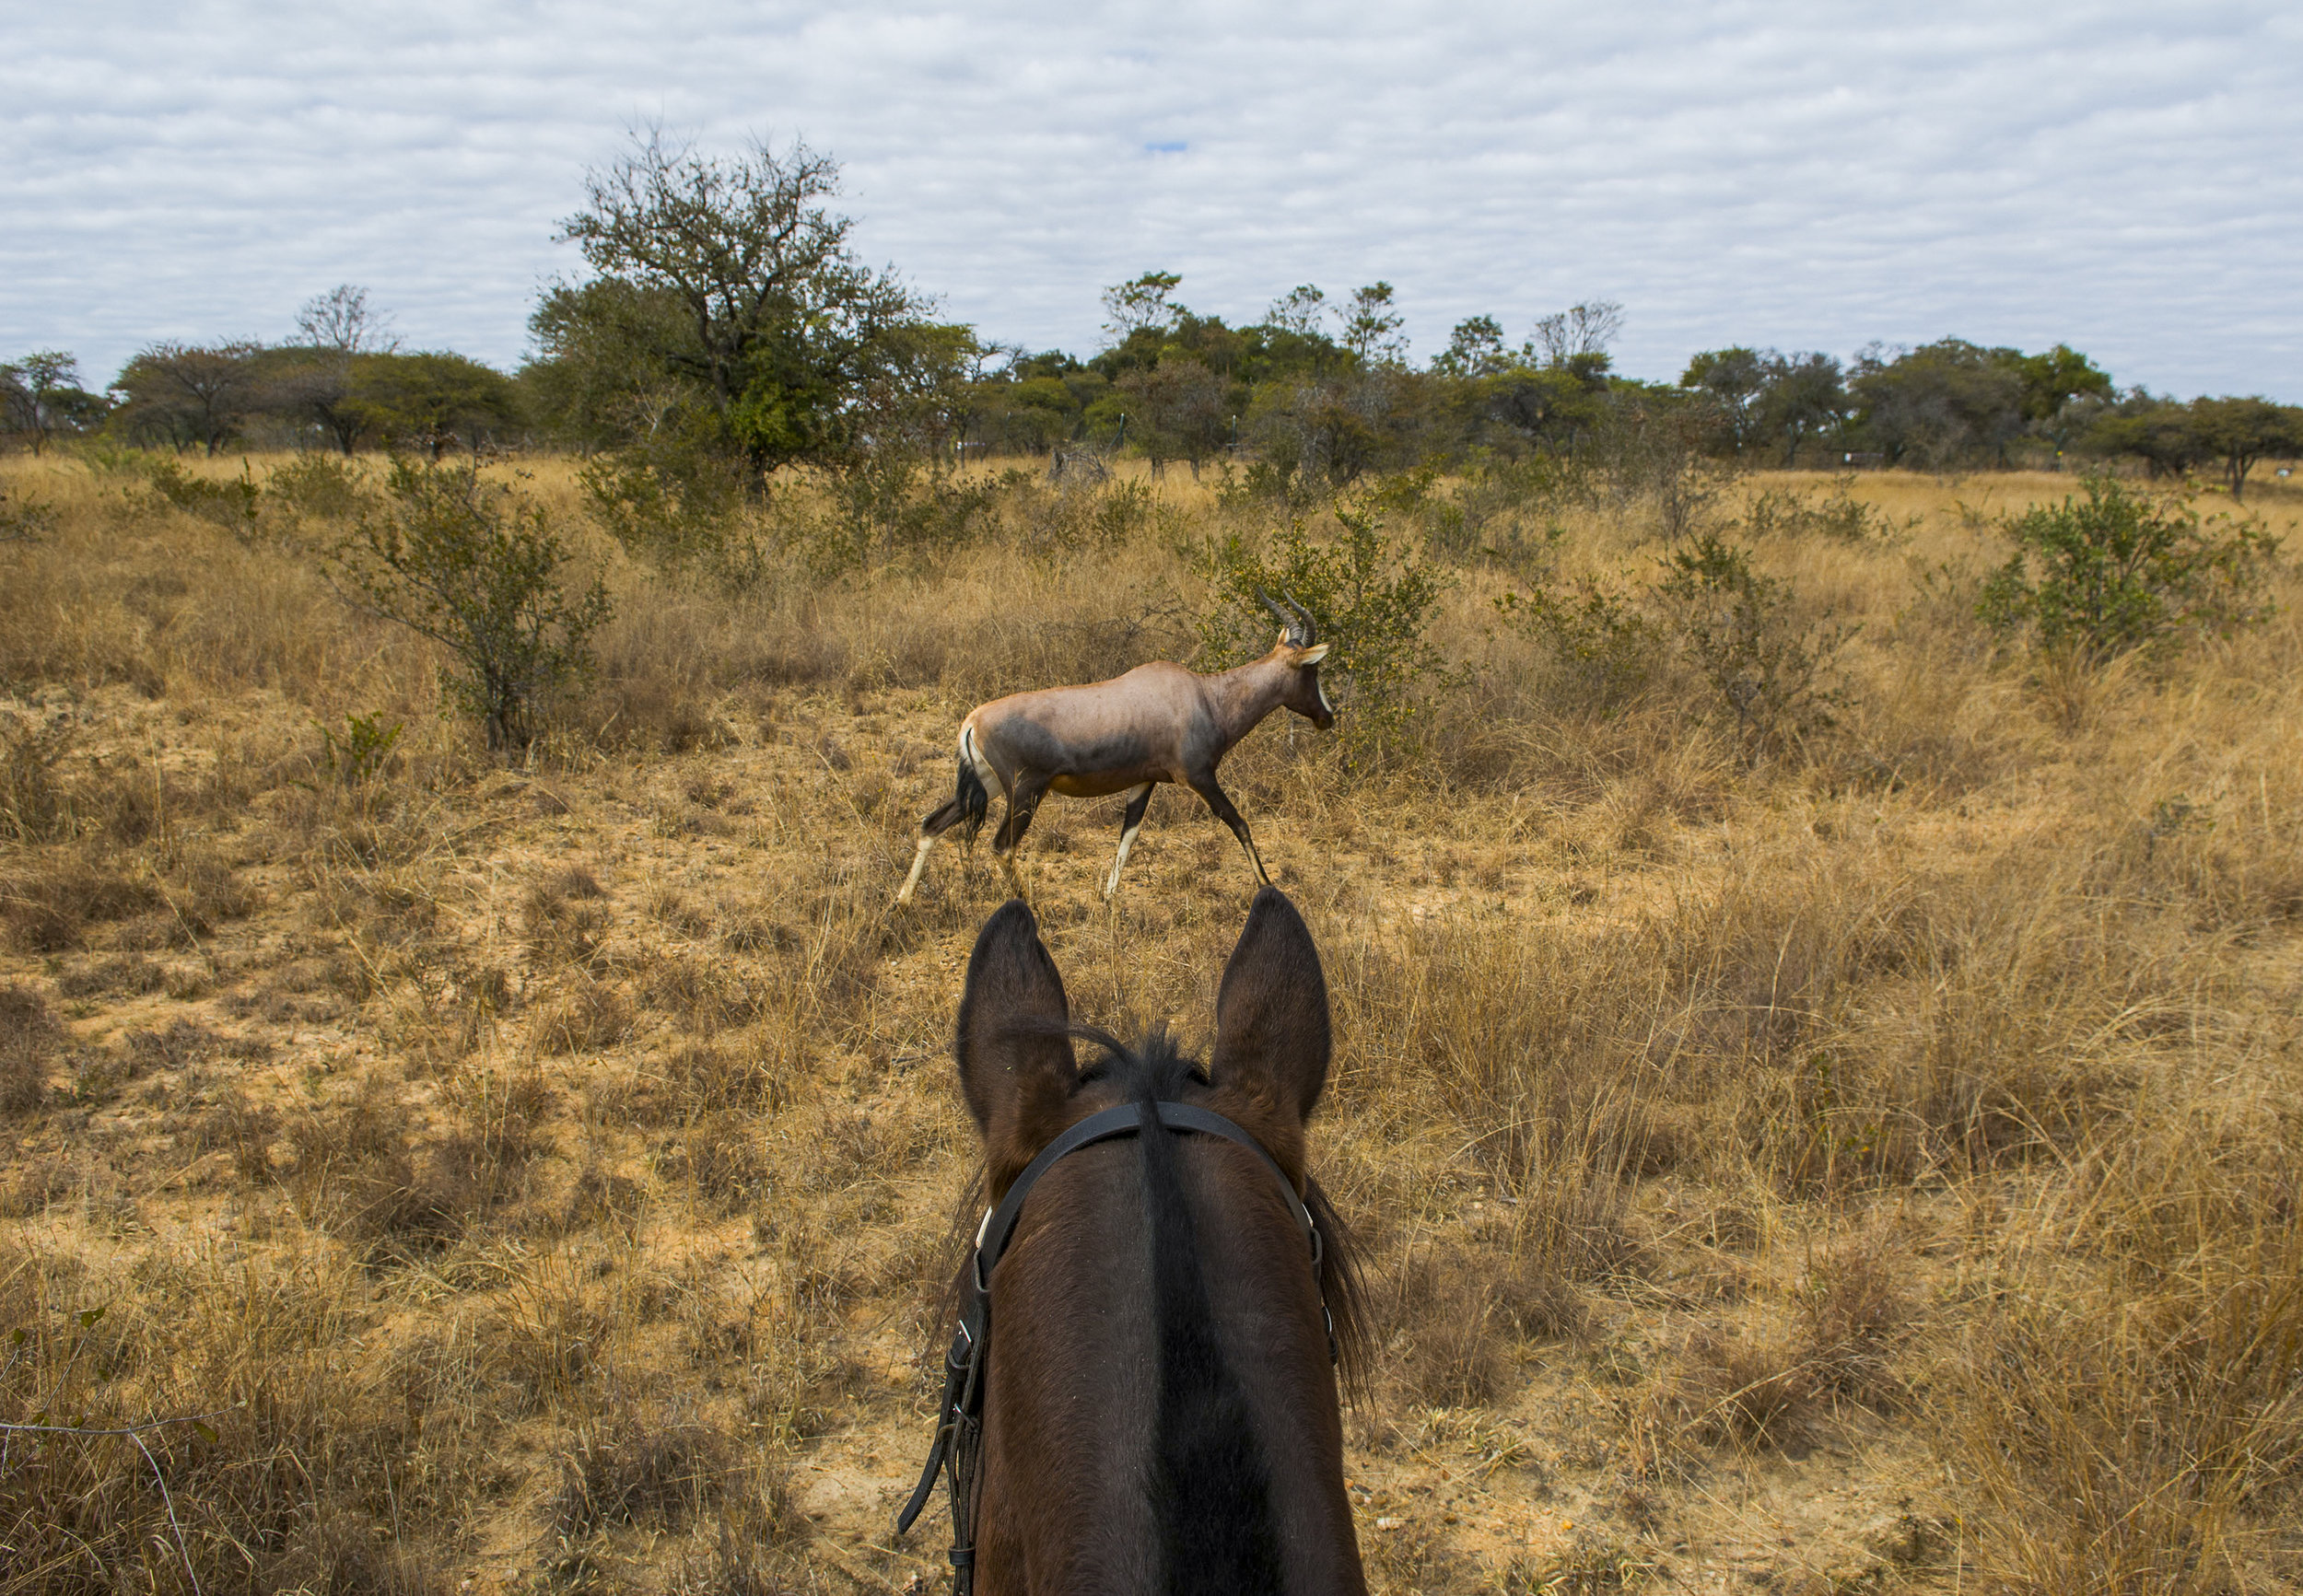  This unusual creature is a wild hybrid of a Red Hartebeest and a Blesbok. He lives in Antelope park, an almost 10,000 acre reserve in central Zimbabwe and the birthplace of African Impact and ALERT. 